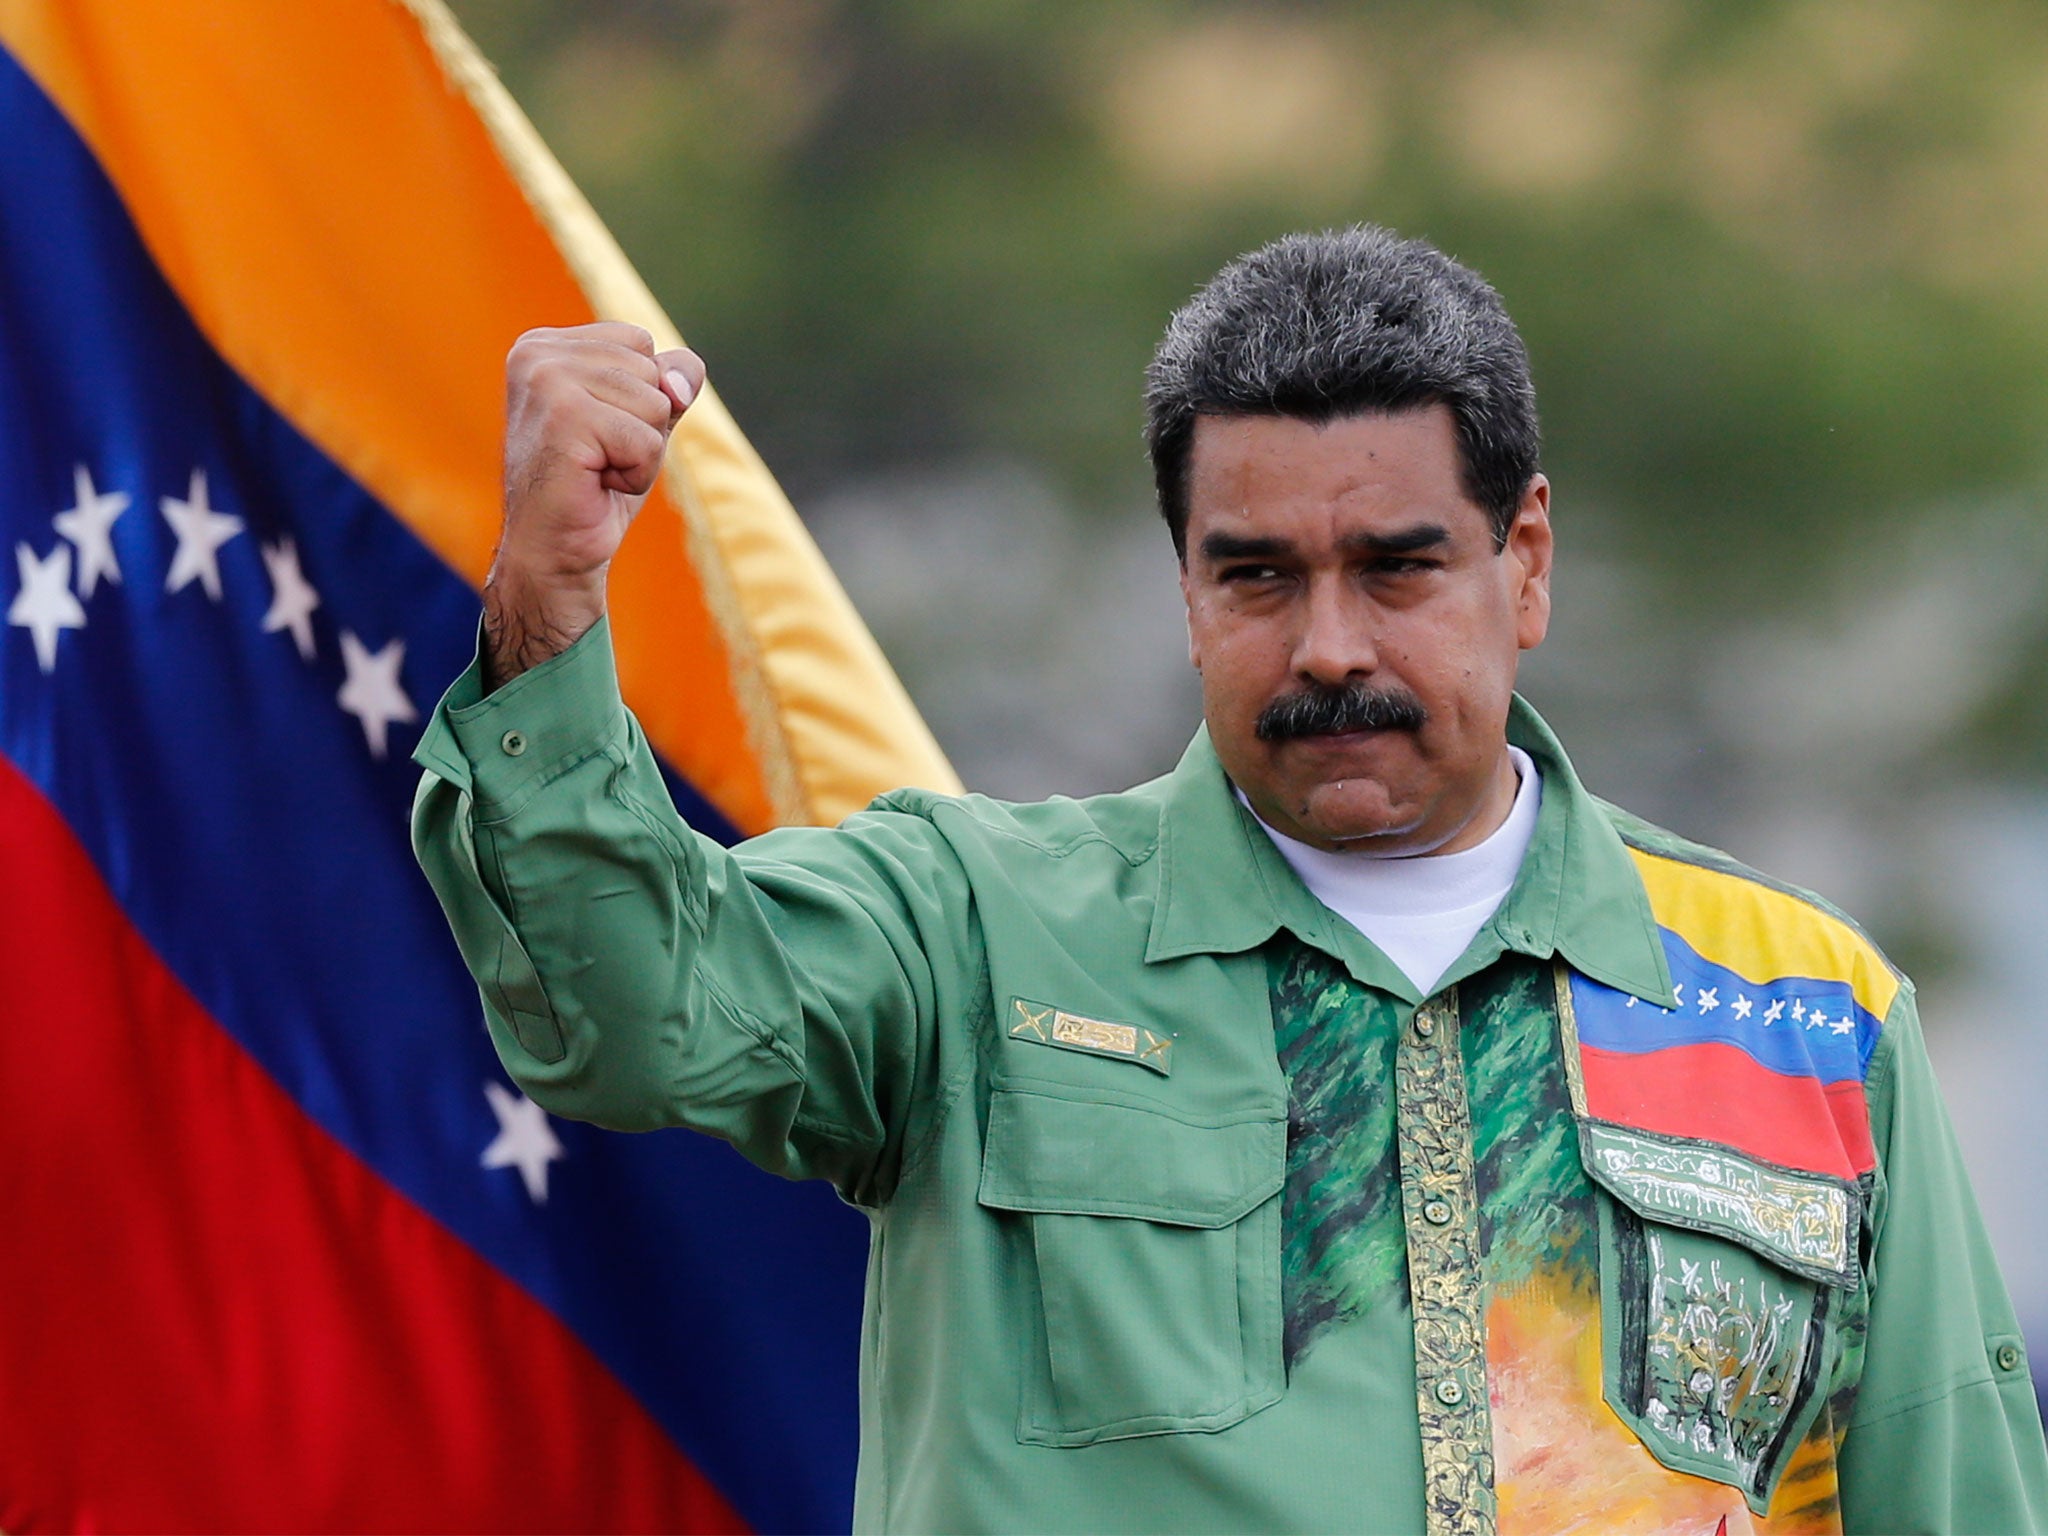 Nicolas Maduro is set to win a second term as president of Venezuela in Sunday's election